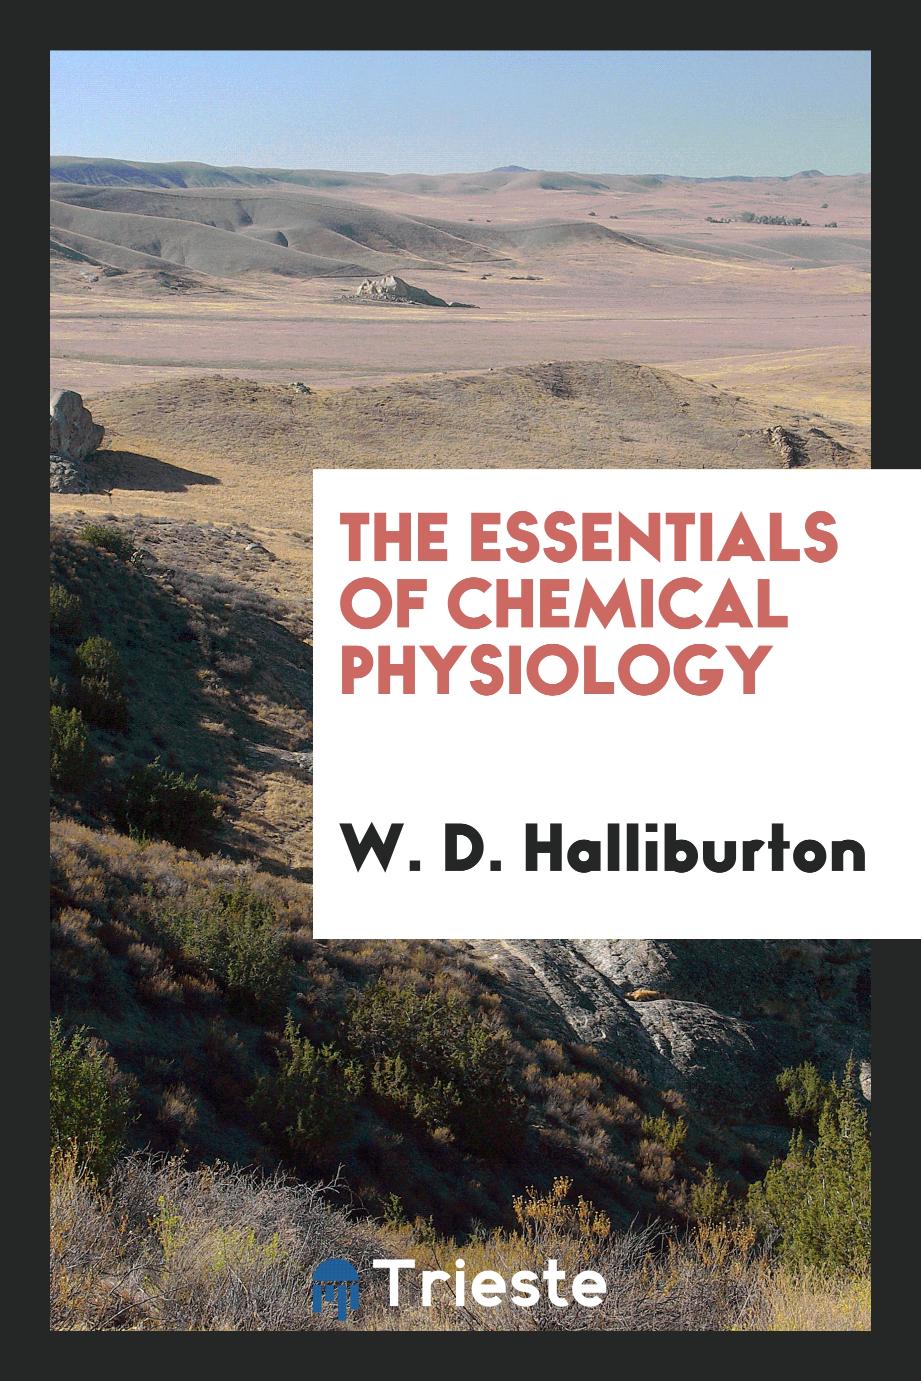 The essentials of chemical physiology